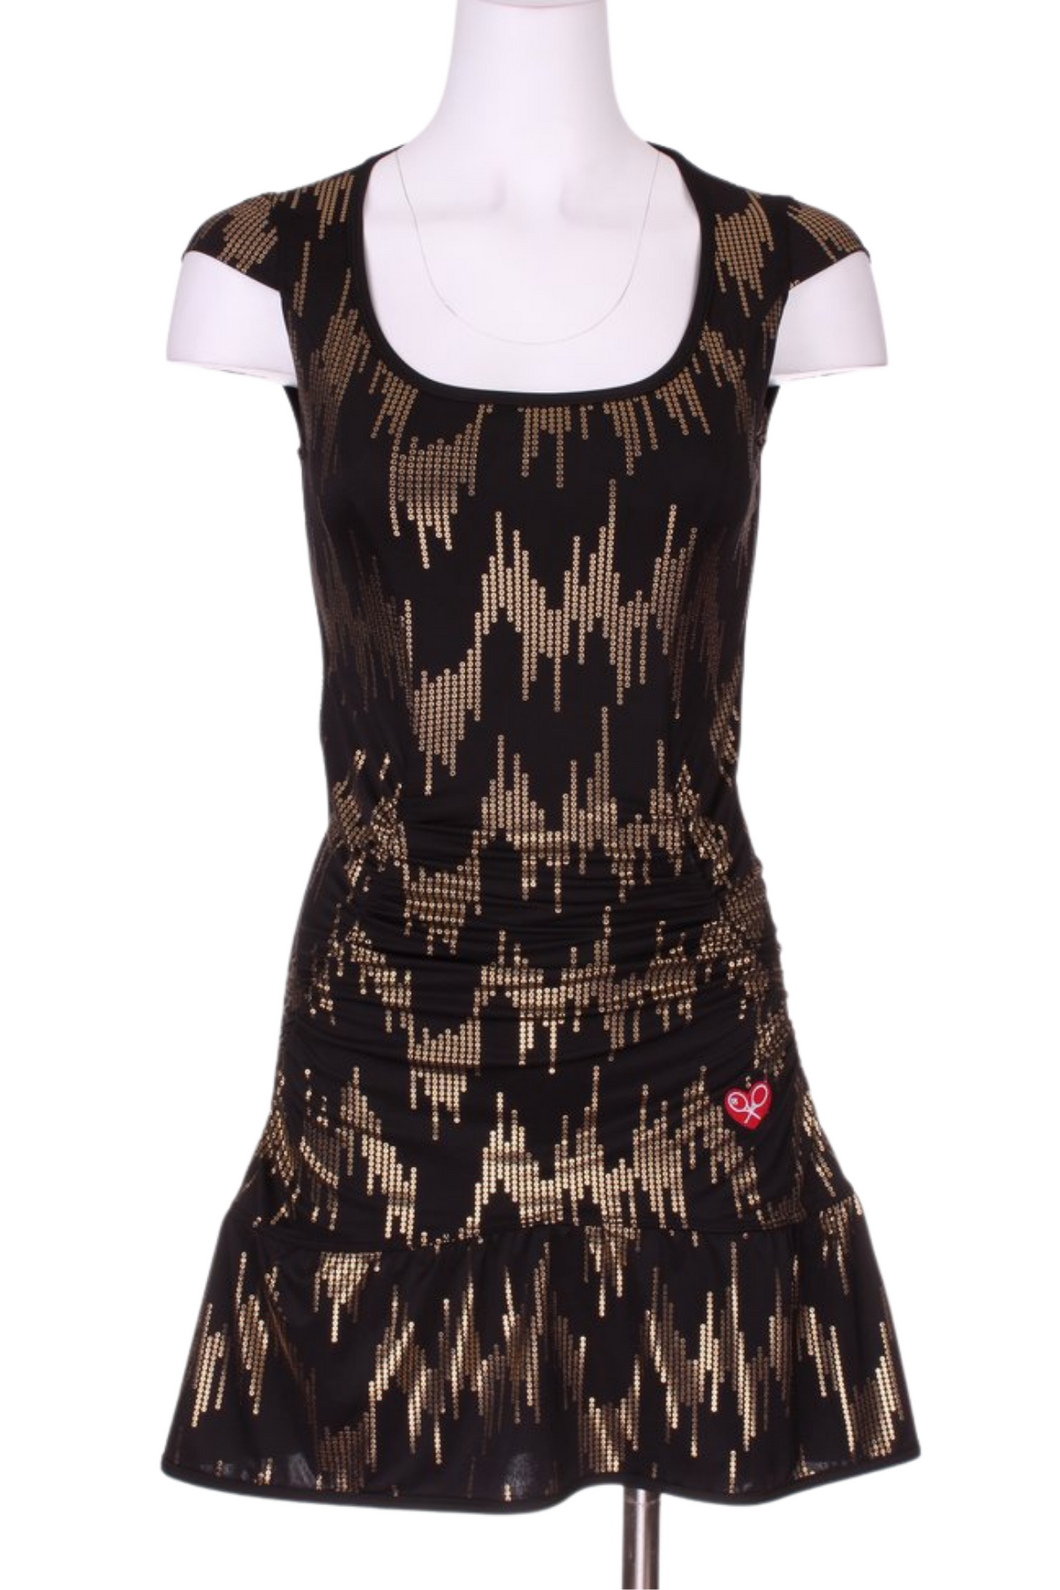 This Special Edition Monroe Dress is Adeline's first (and most popular) designs! Named after the icon star - the 